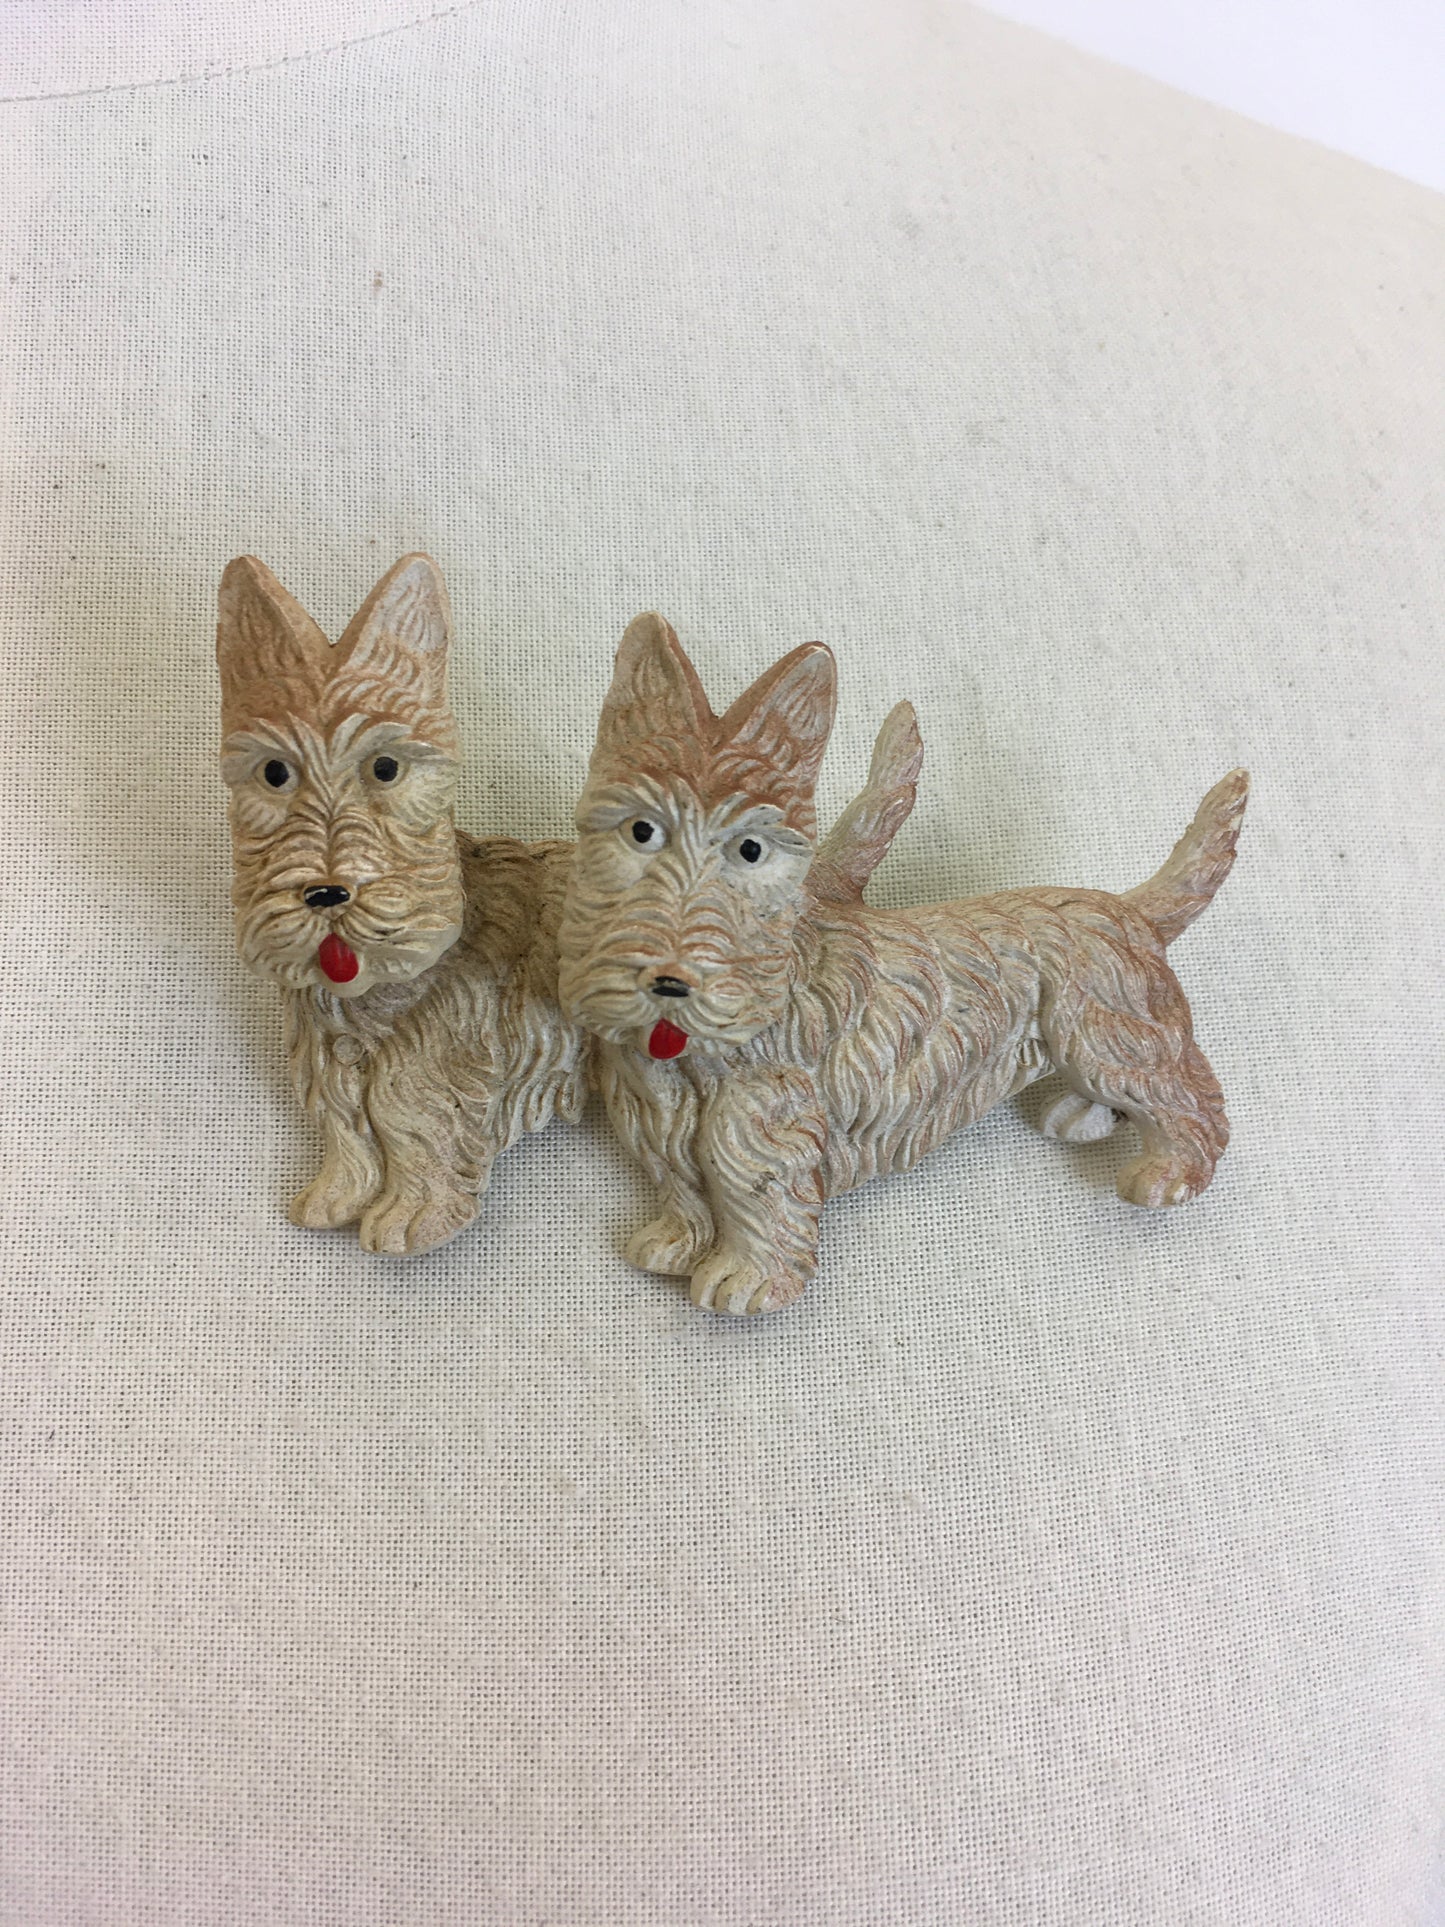 Original 1940’s Early Plastic Double Dog Brooch - With Moveable Heads and Nostalgic Charm